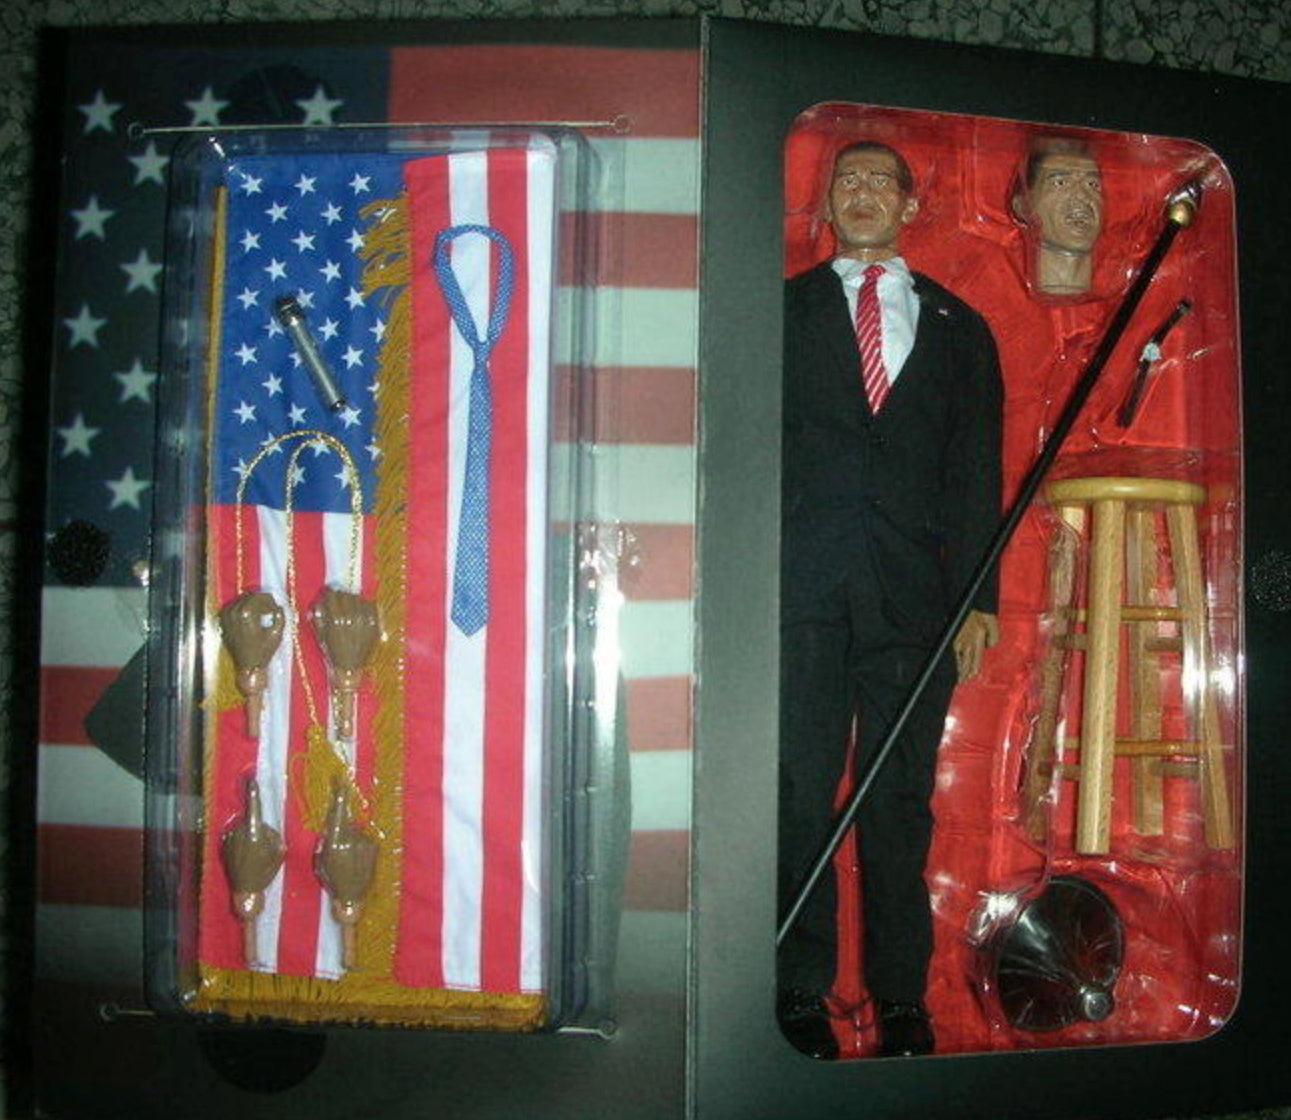 DID 1/6 12" US Presidential Election 2008 Obama Action Figure